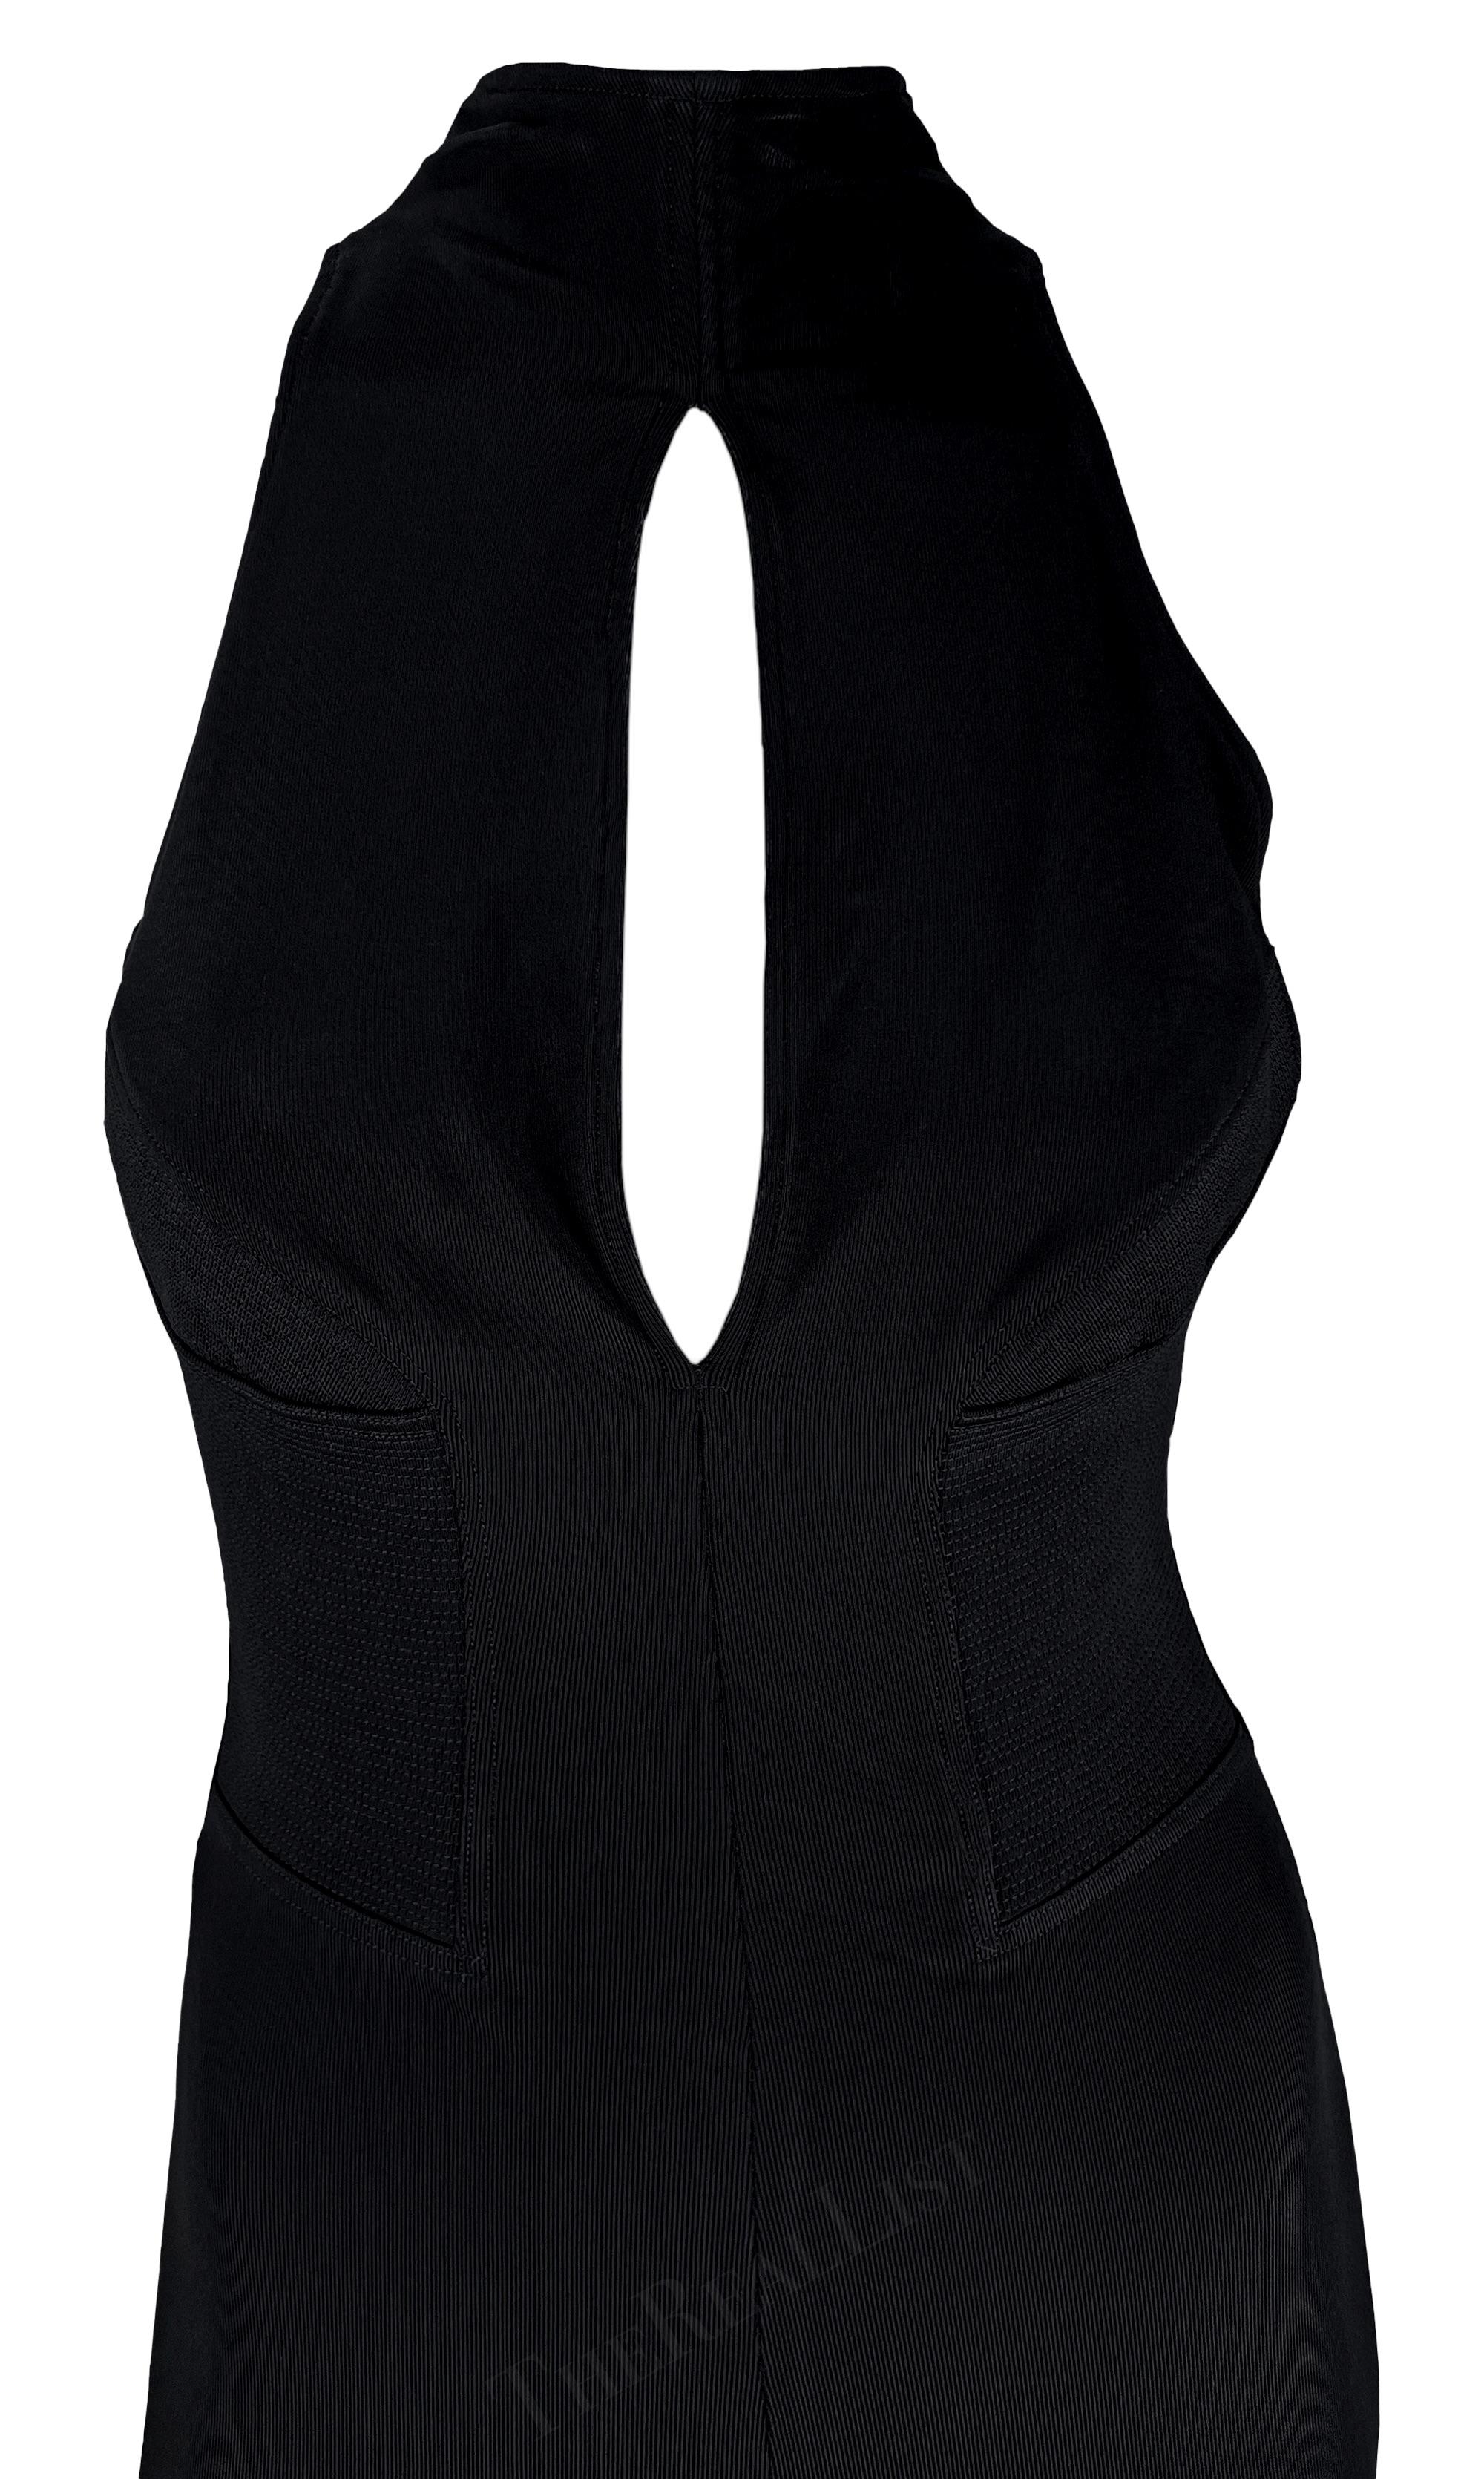 F/W 1991 Gianni Versace Runway Sleeveless Stretch Bodycon Ribbed Black Catsuit 1